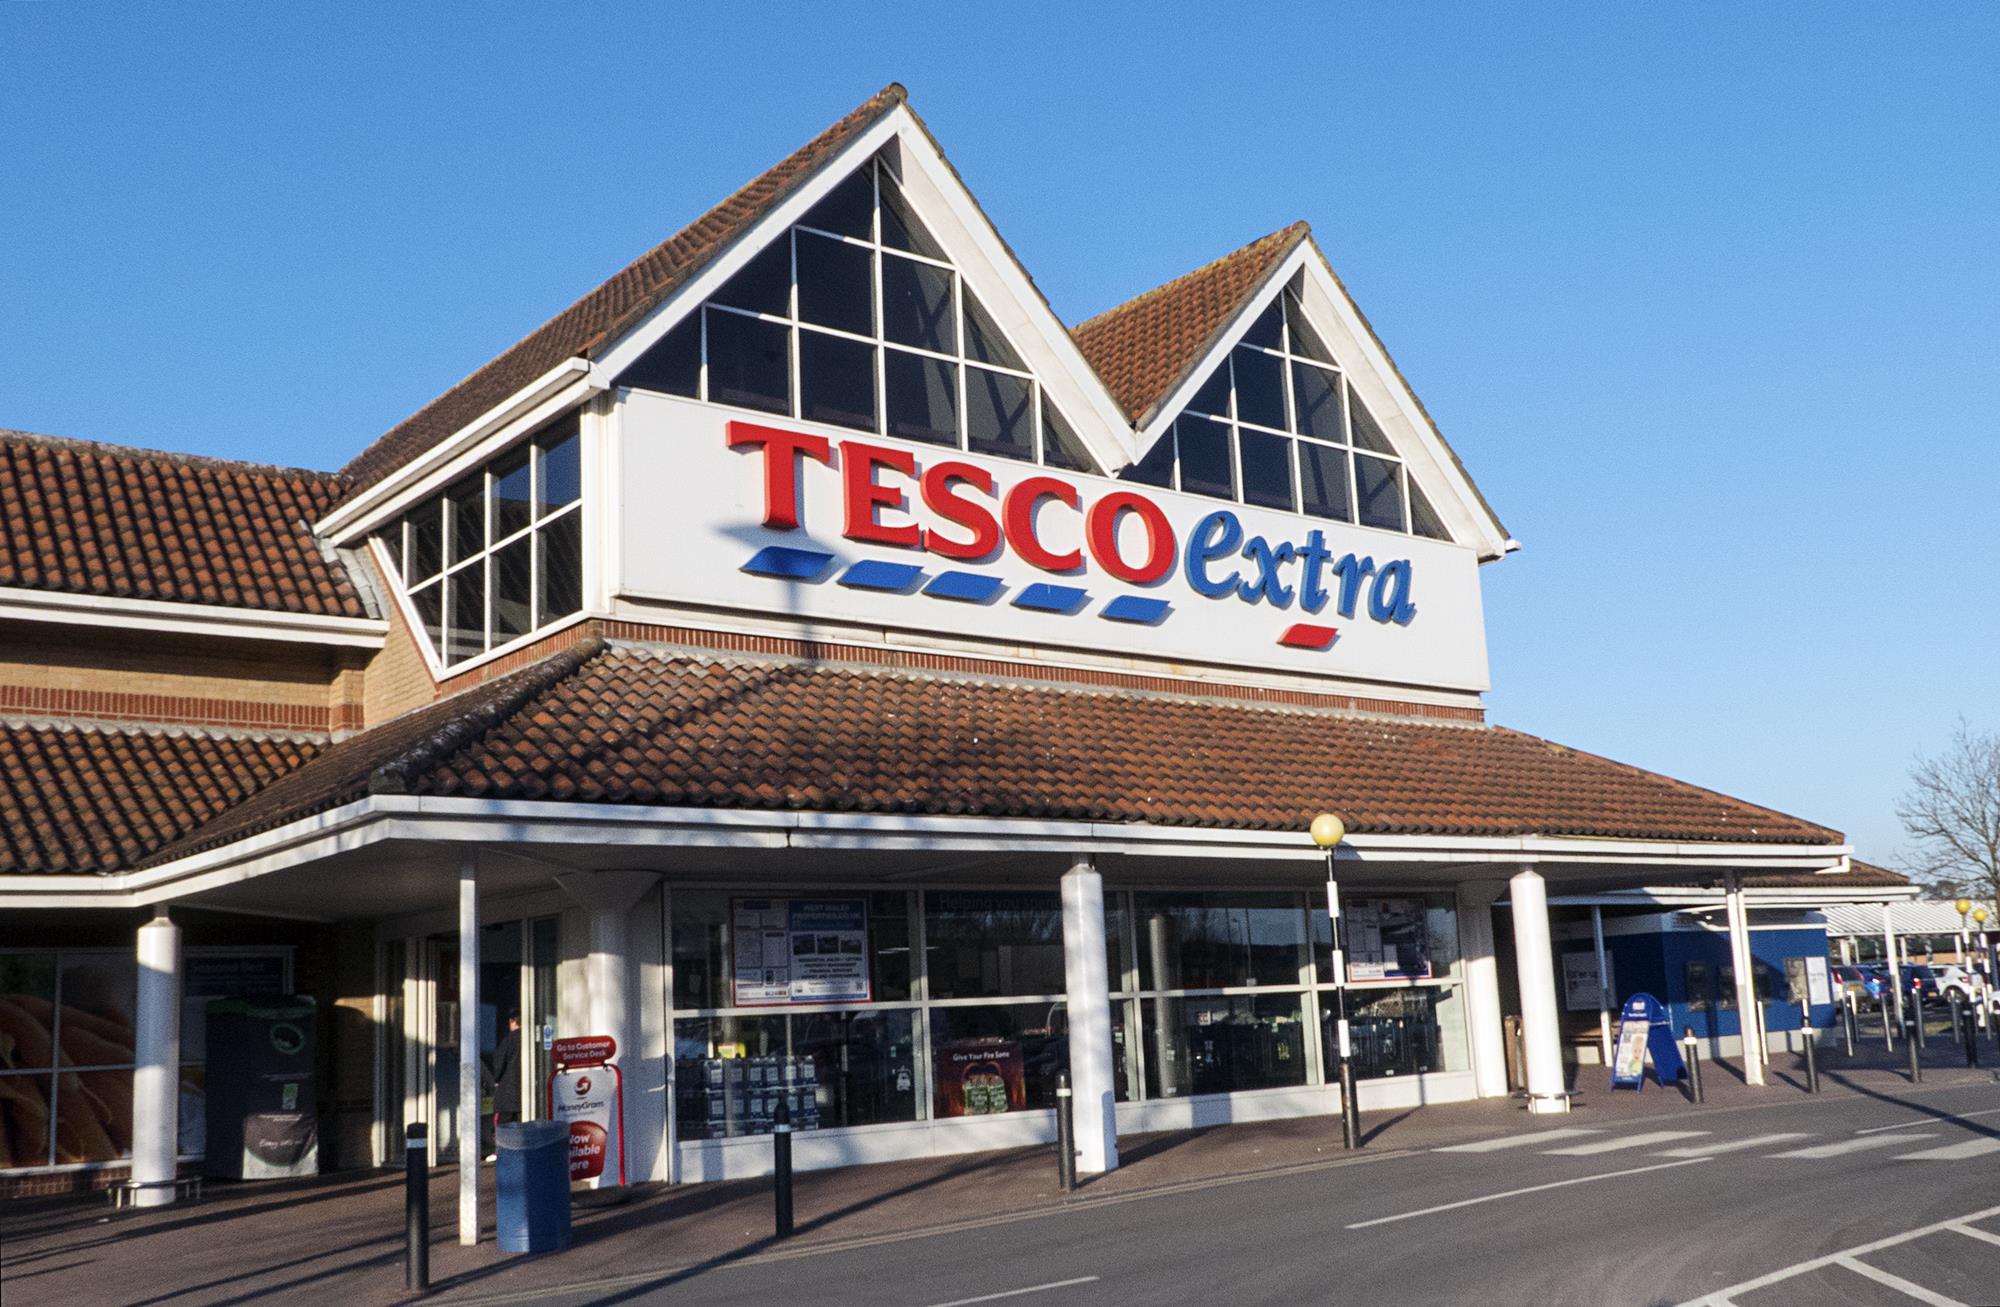 Tesco in Brexit incoterms bills dispute with suppliers | News | The Grocer